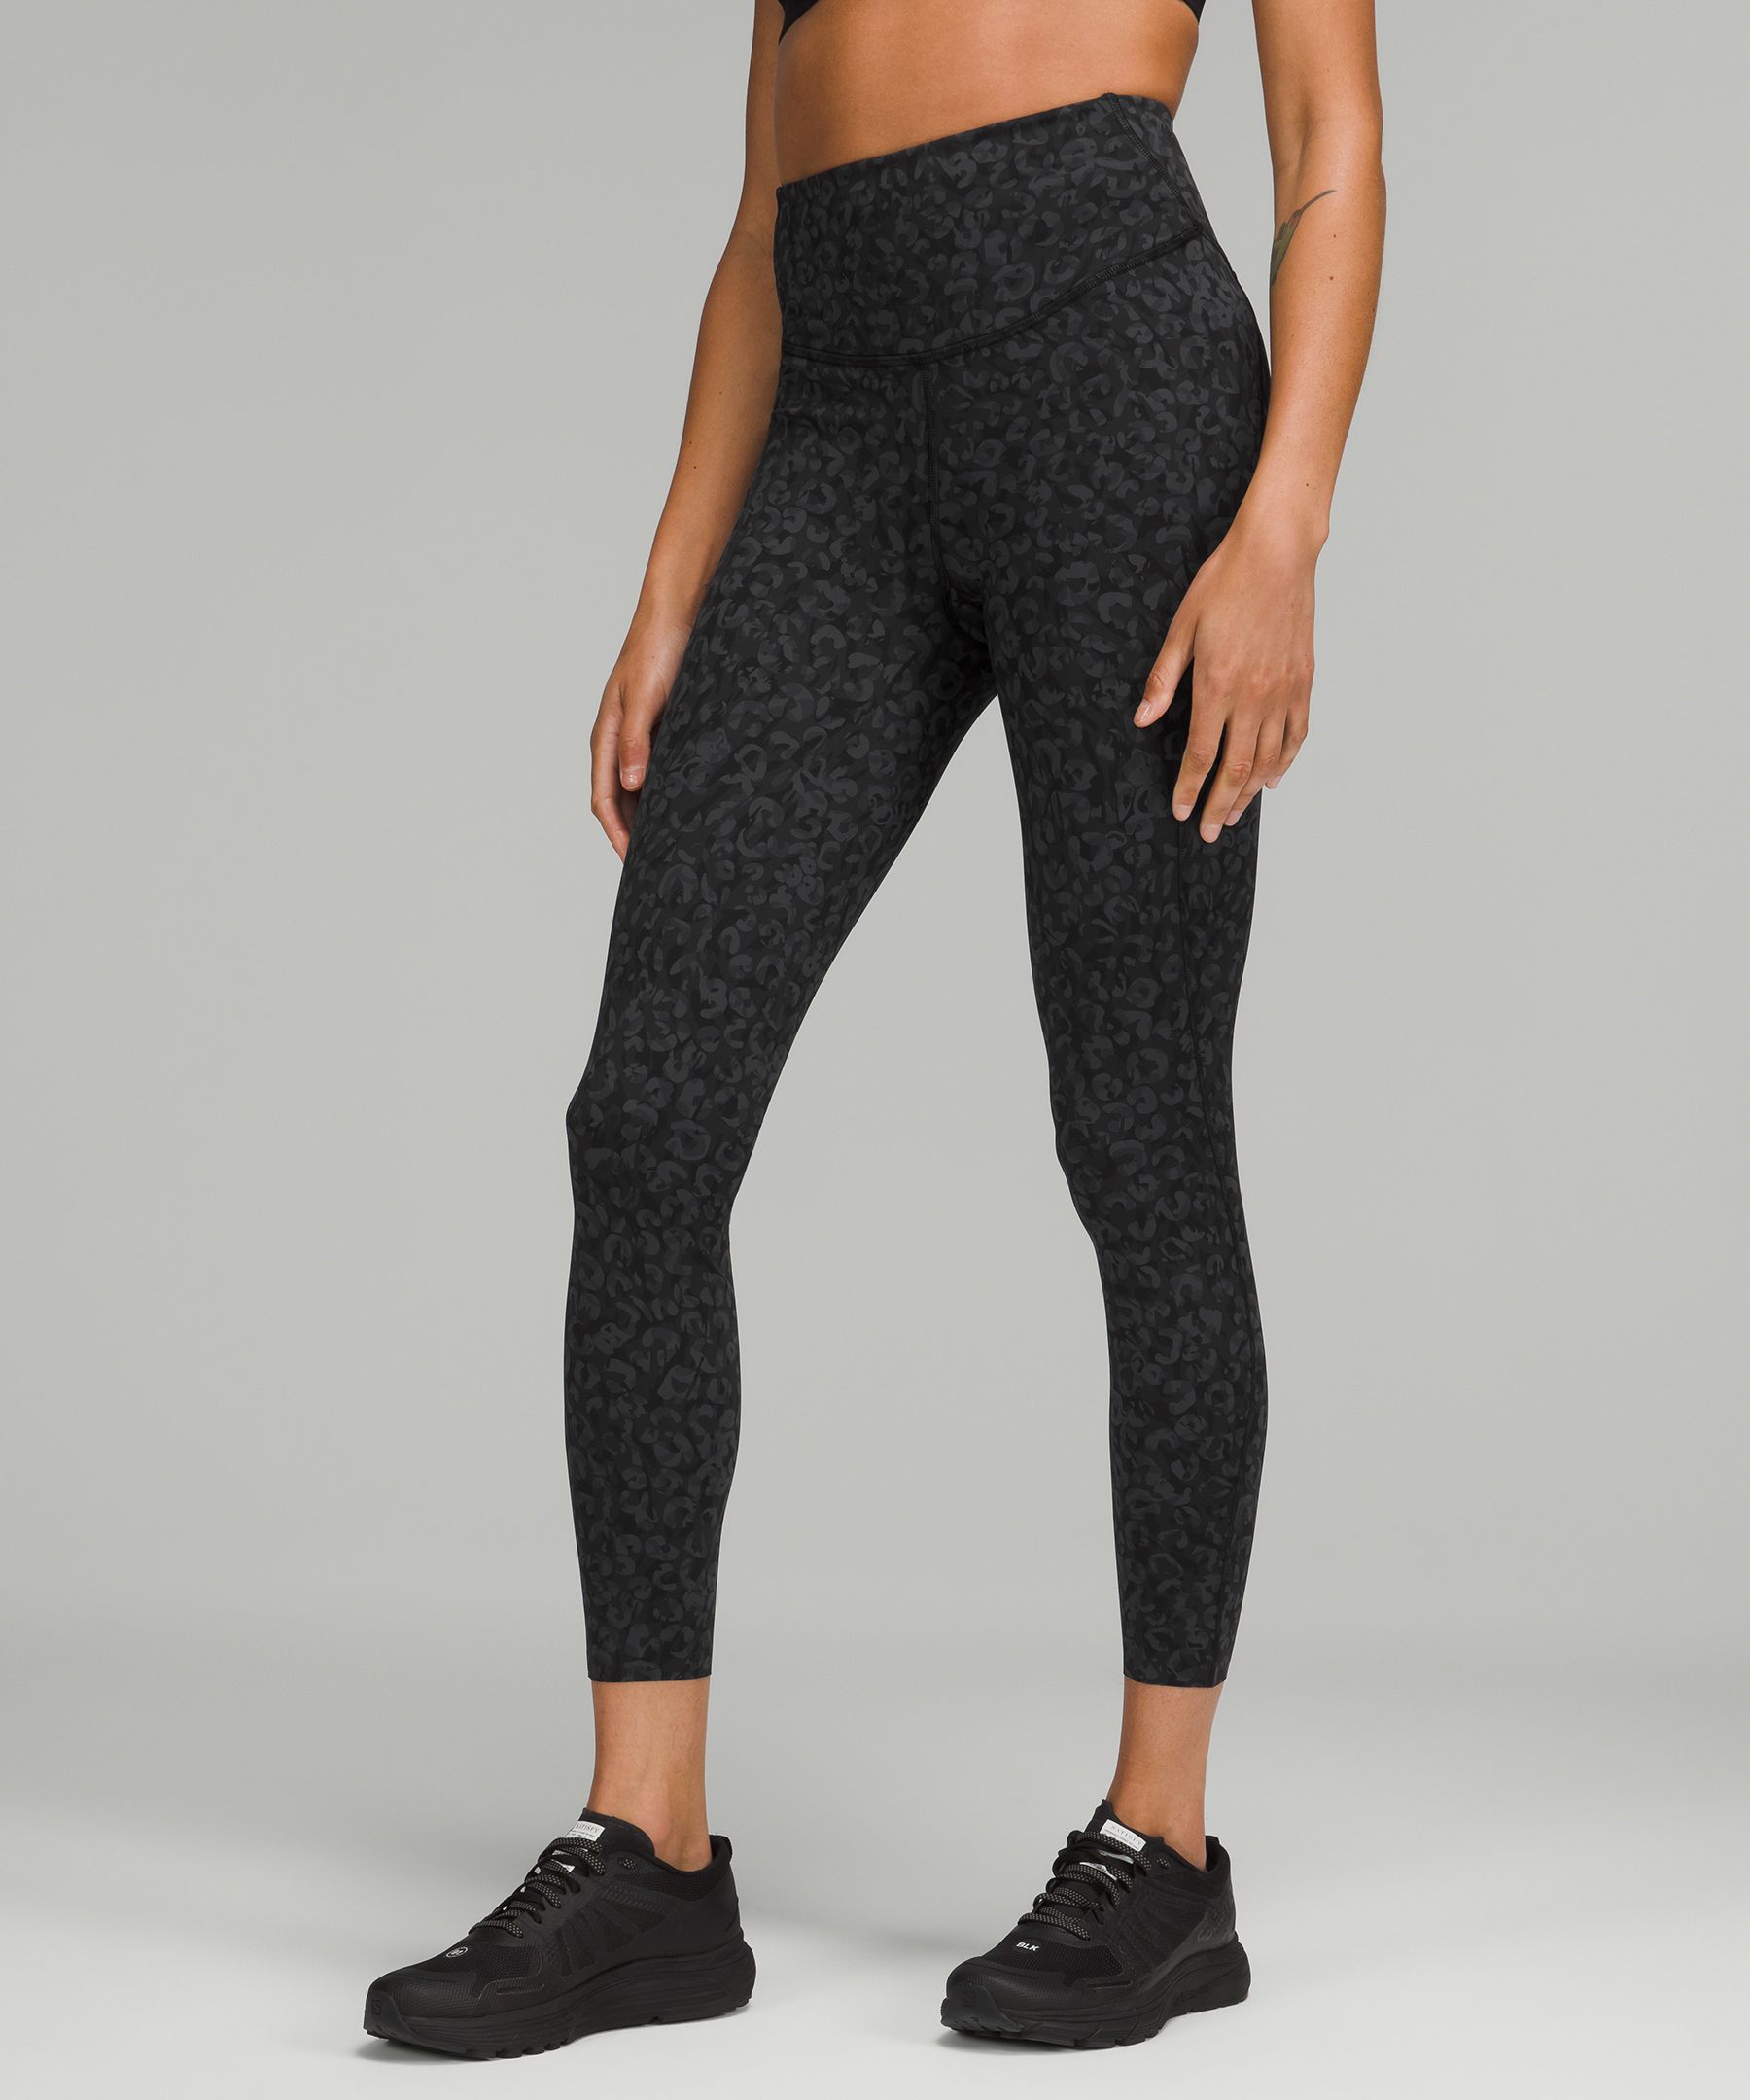 Lululemon Base Pace High-rise Running Tights 25"